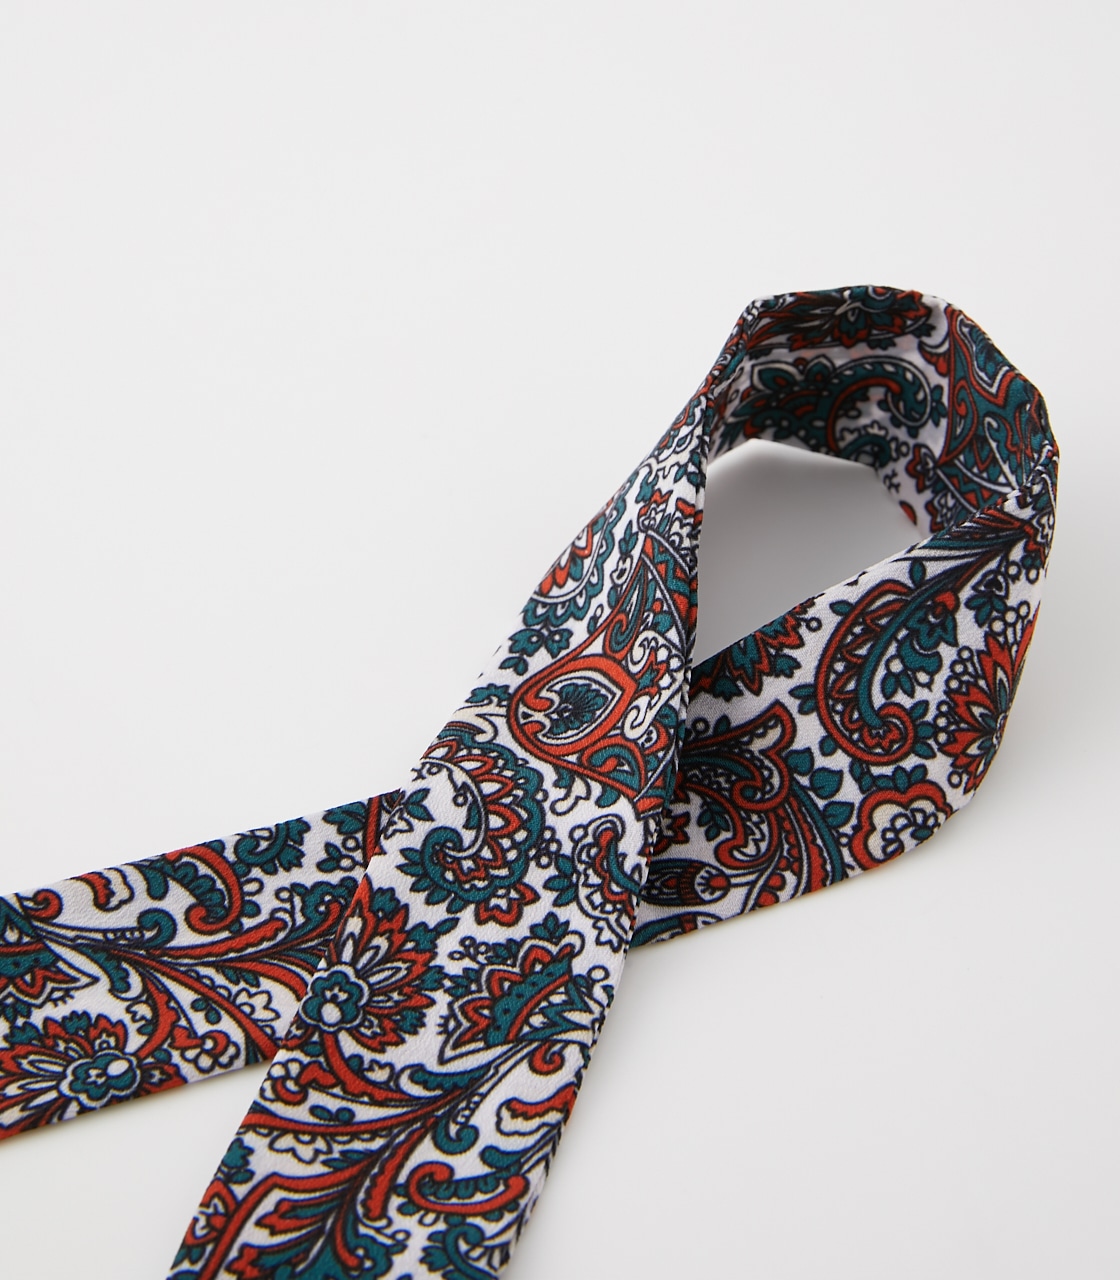 FLOWER PAISLEY SCARF NECKLACE/フラワーペイズリースカーフネックレス 詳細画像 柄KHA 3